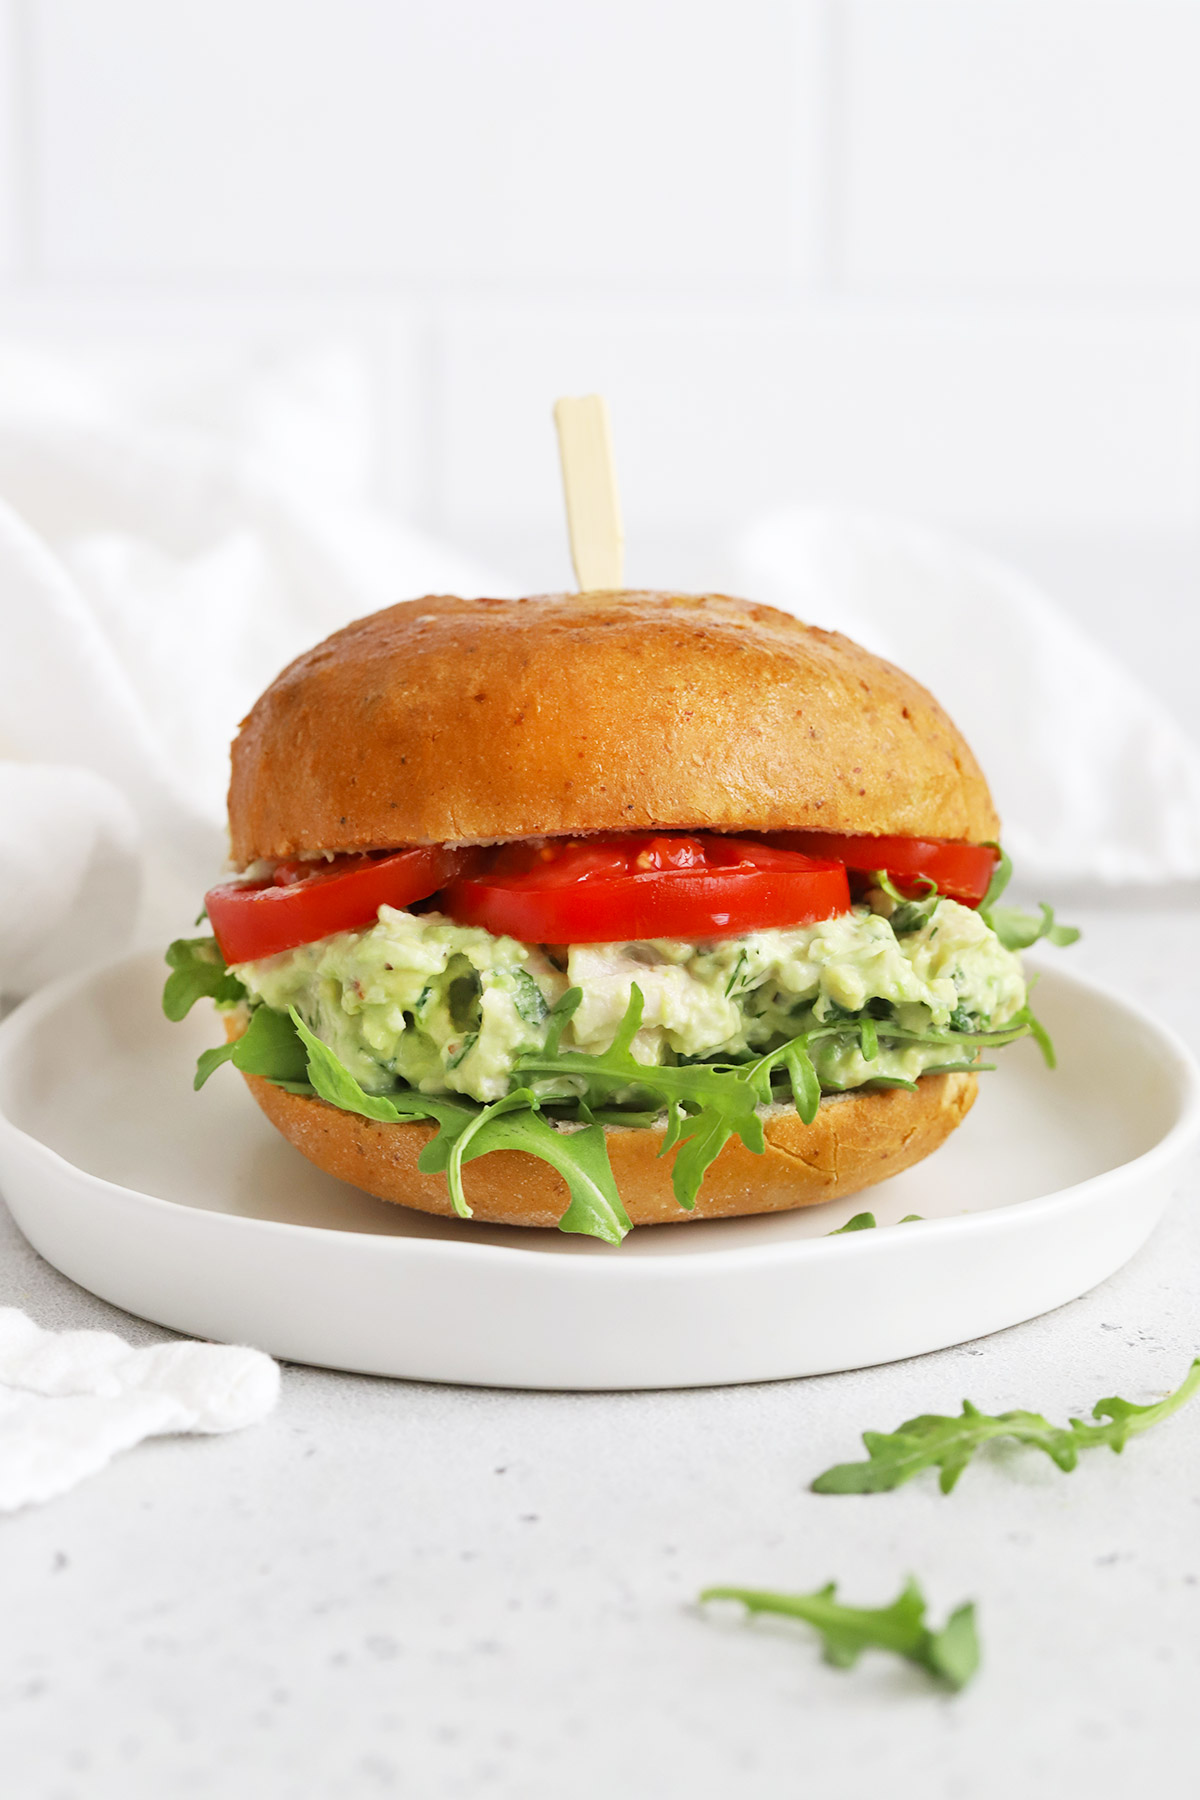 Front view of an avocado chicken salad sandwich with tomato and arugula on a white plate.